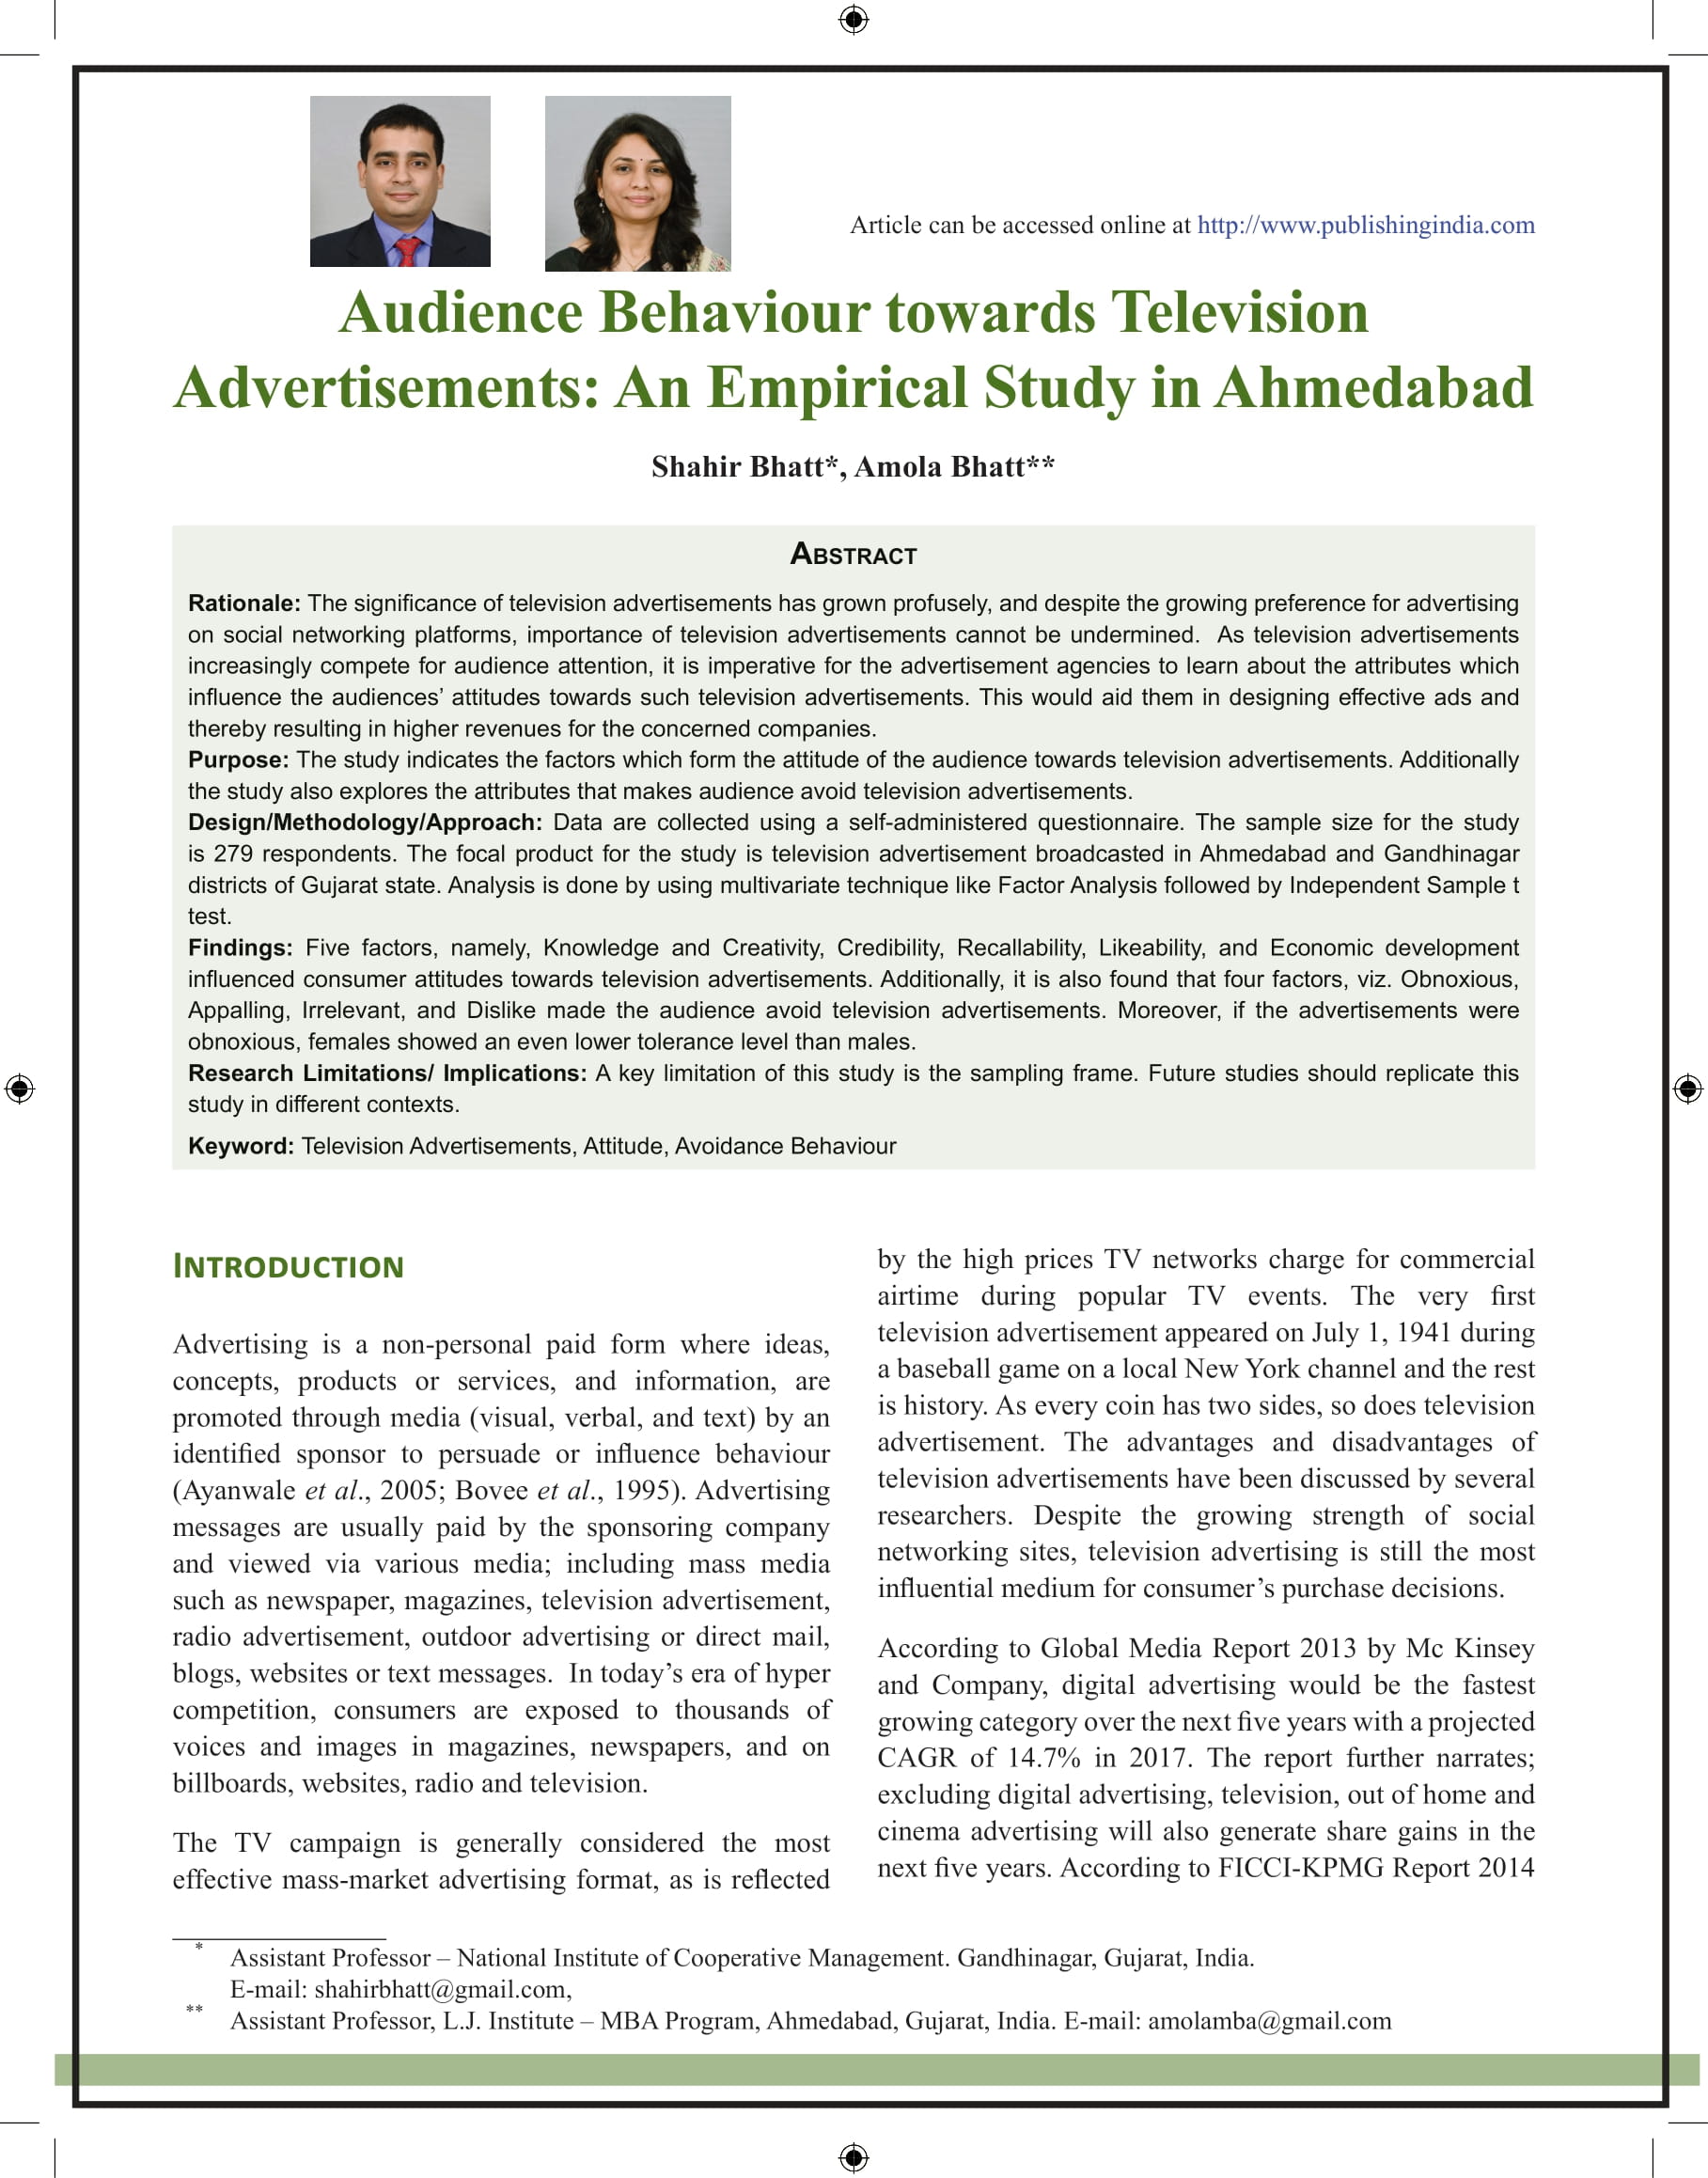 Audience behavior towards television advertisements: An Empirical Study in Ahmedabad